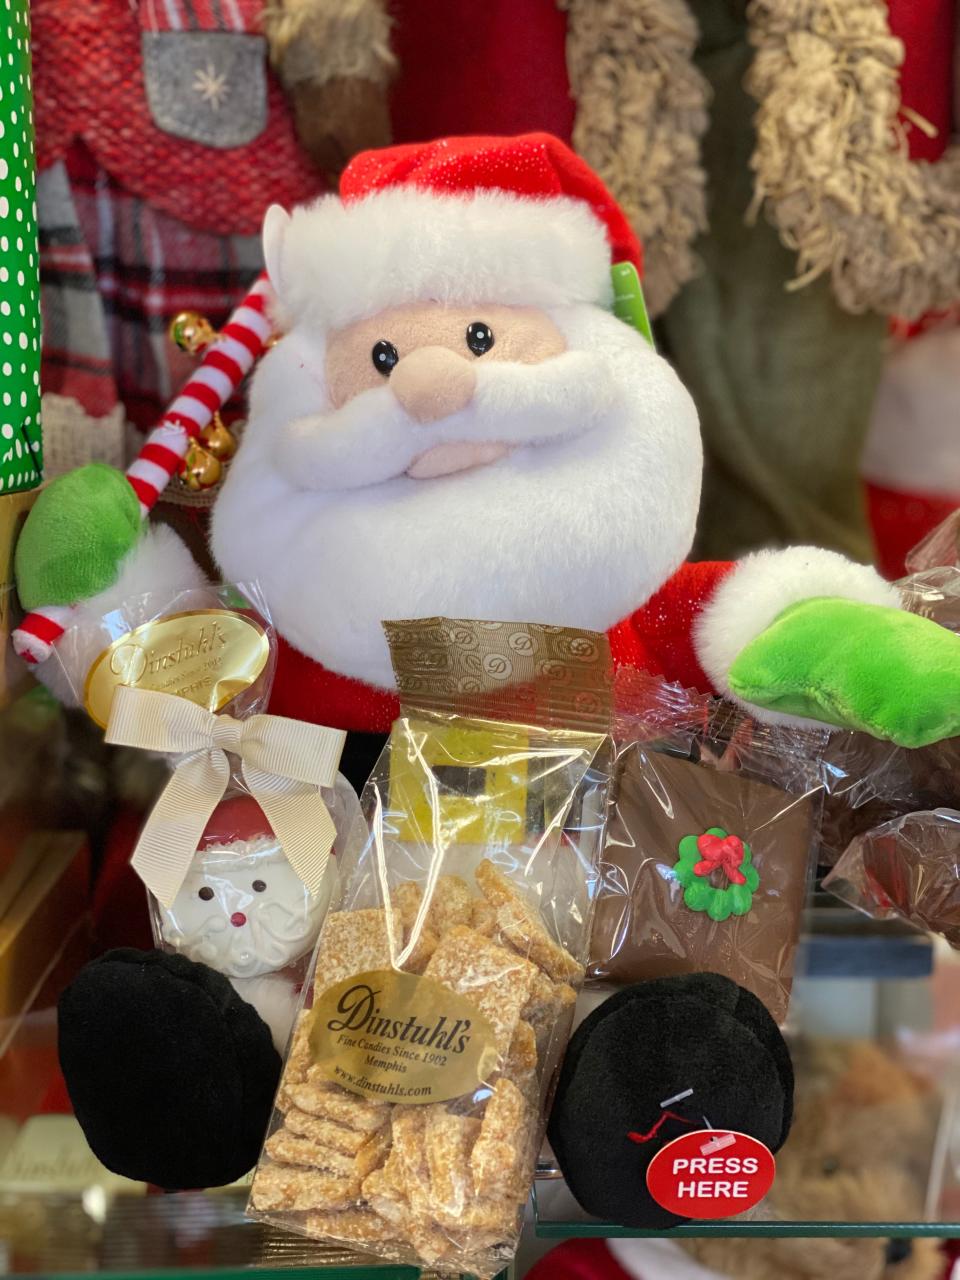 Dinstuhl's has been making candies in Memphis since 1902.  Cashew Crunch, Chocolate Covered Graham Crackers and Chocolate Covered Oreos are a few of the most popular items for stocking stuffers.